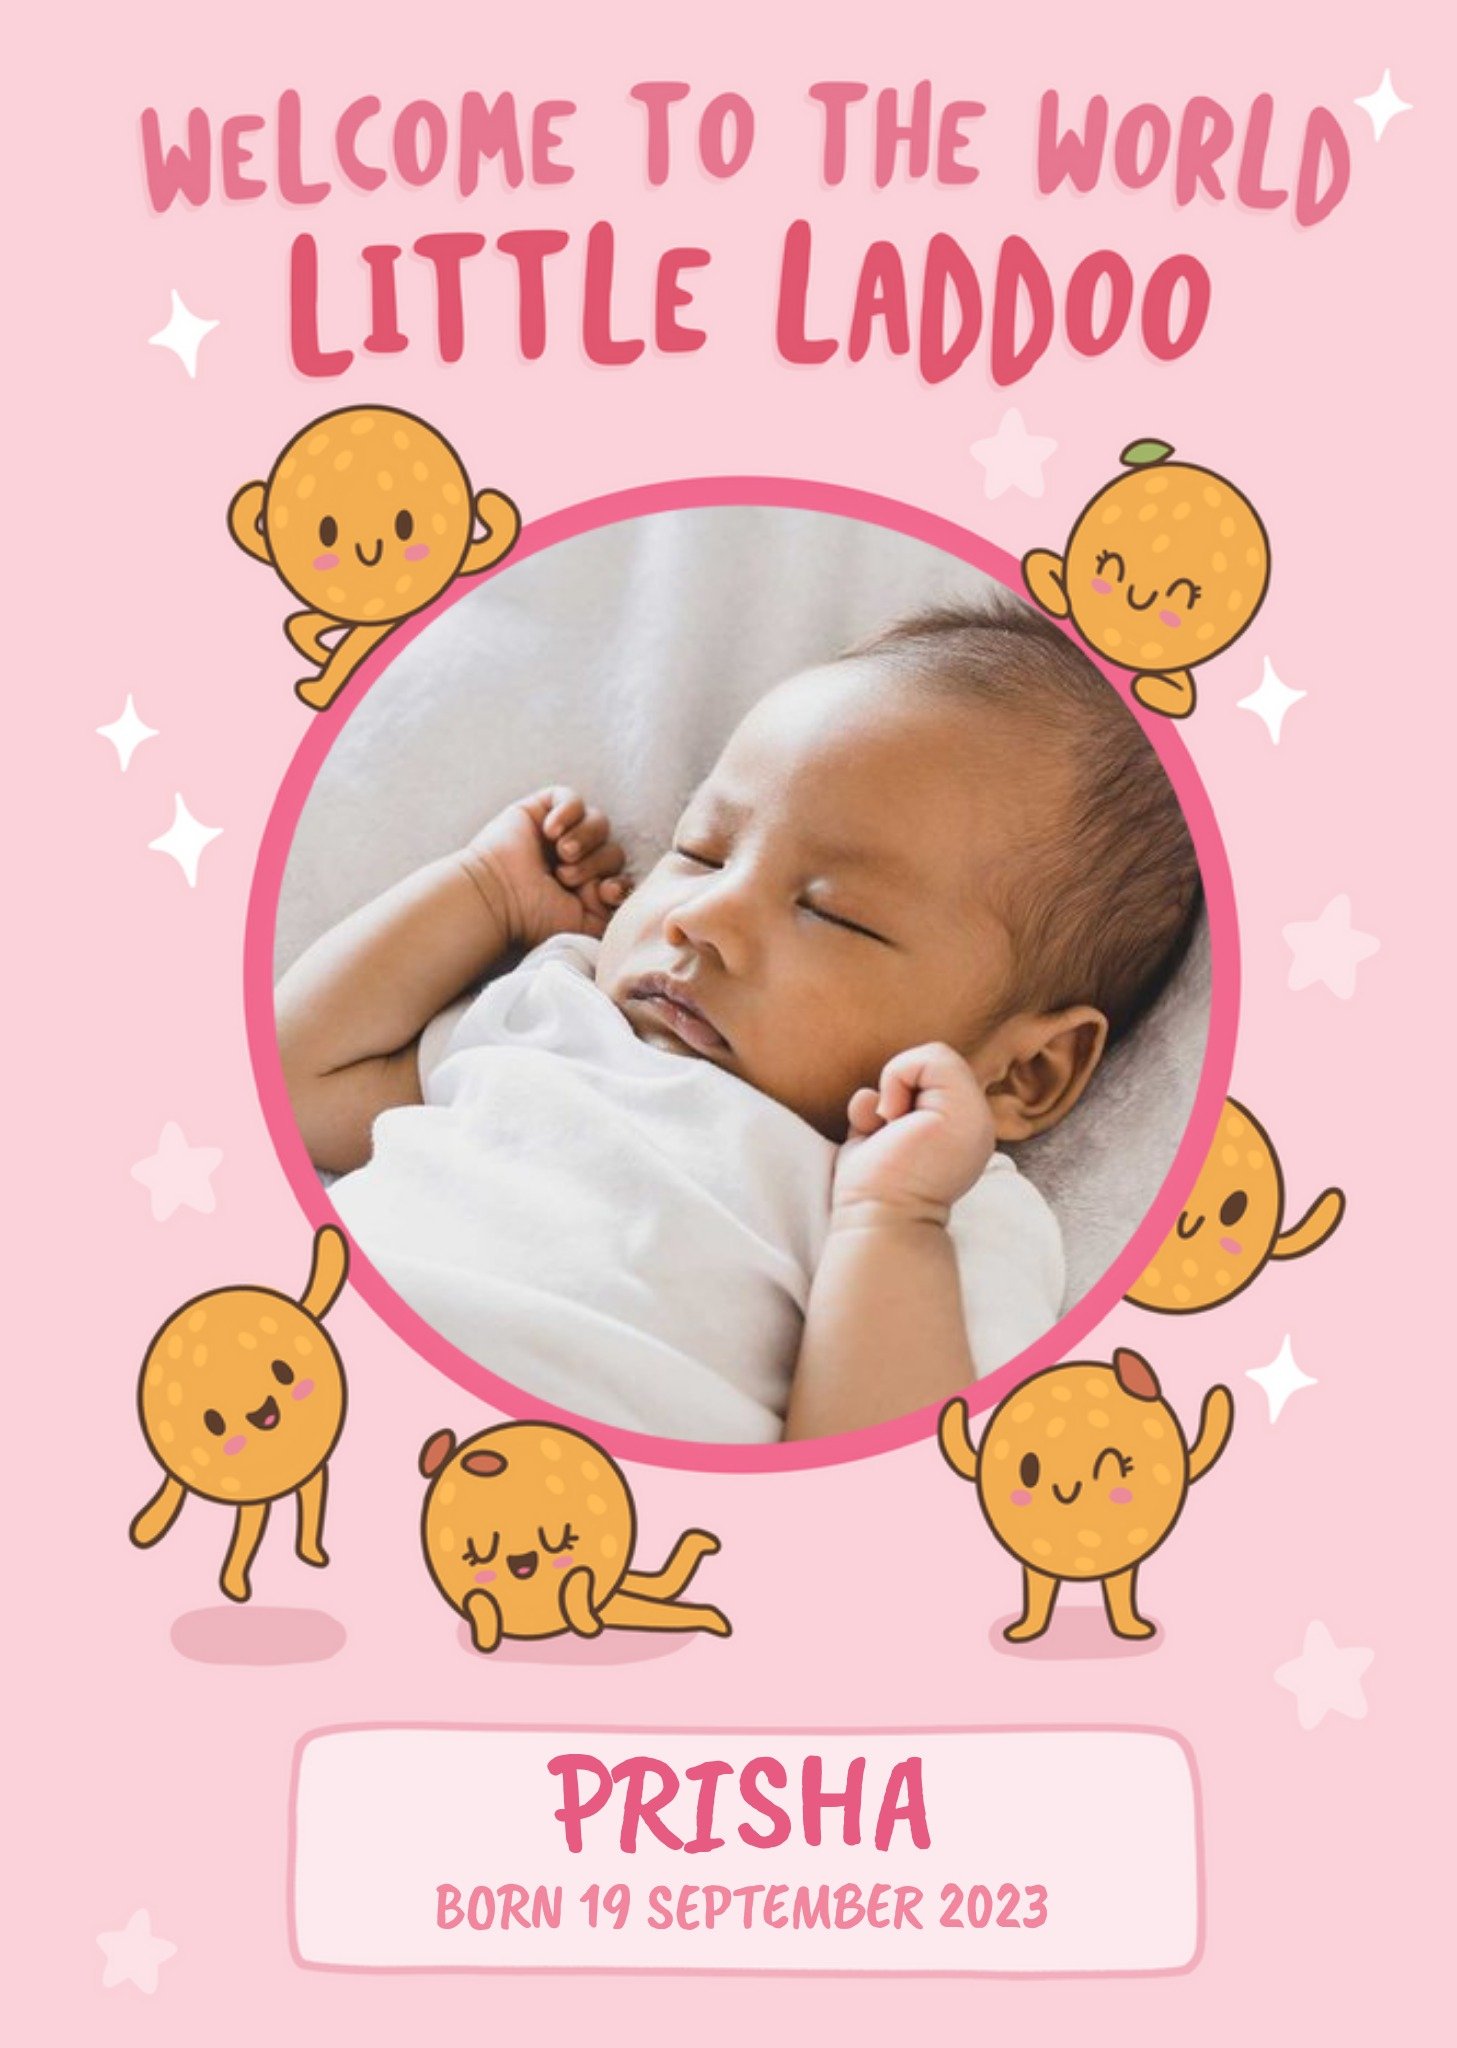 Moonpig Illustration Of Laddoo Characters Welcome To The World Photo Upload New Baby Girl Card Ecard